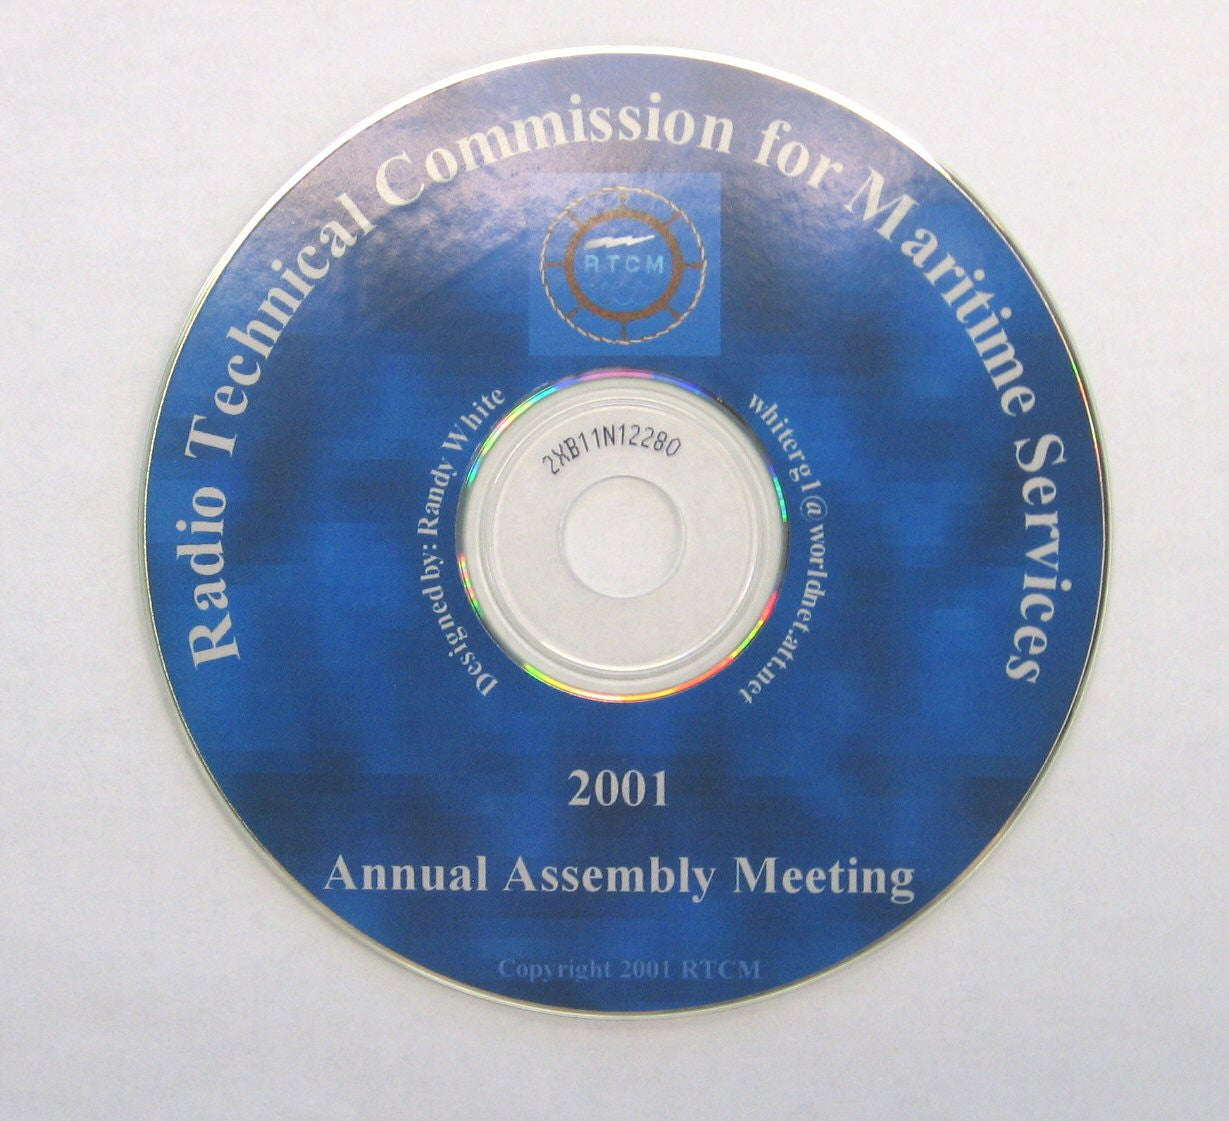 RTCM Annual Assembly Meeting, May 2001, St. Pete Beach, FL - Presentations on CD-ROM